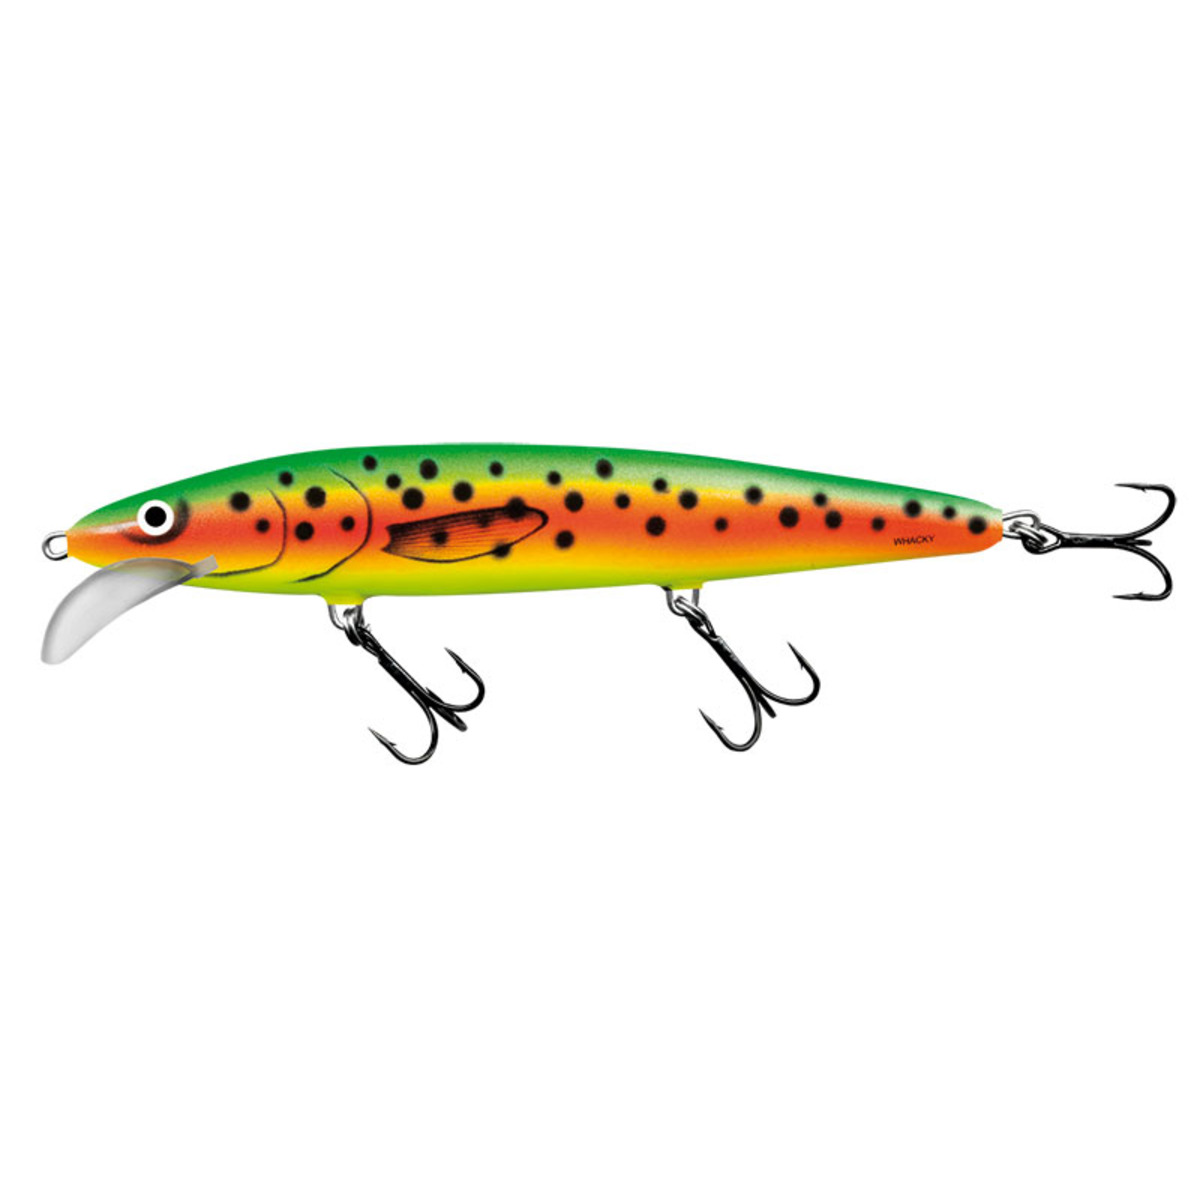 Salmo Whacky Floating - 12 Cm - Spotted Parrot